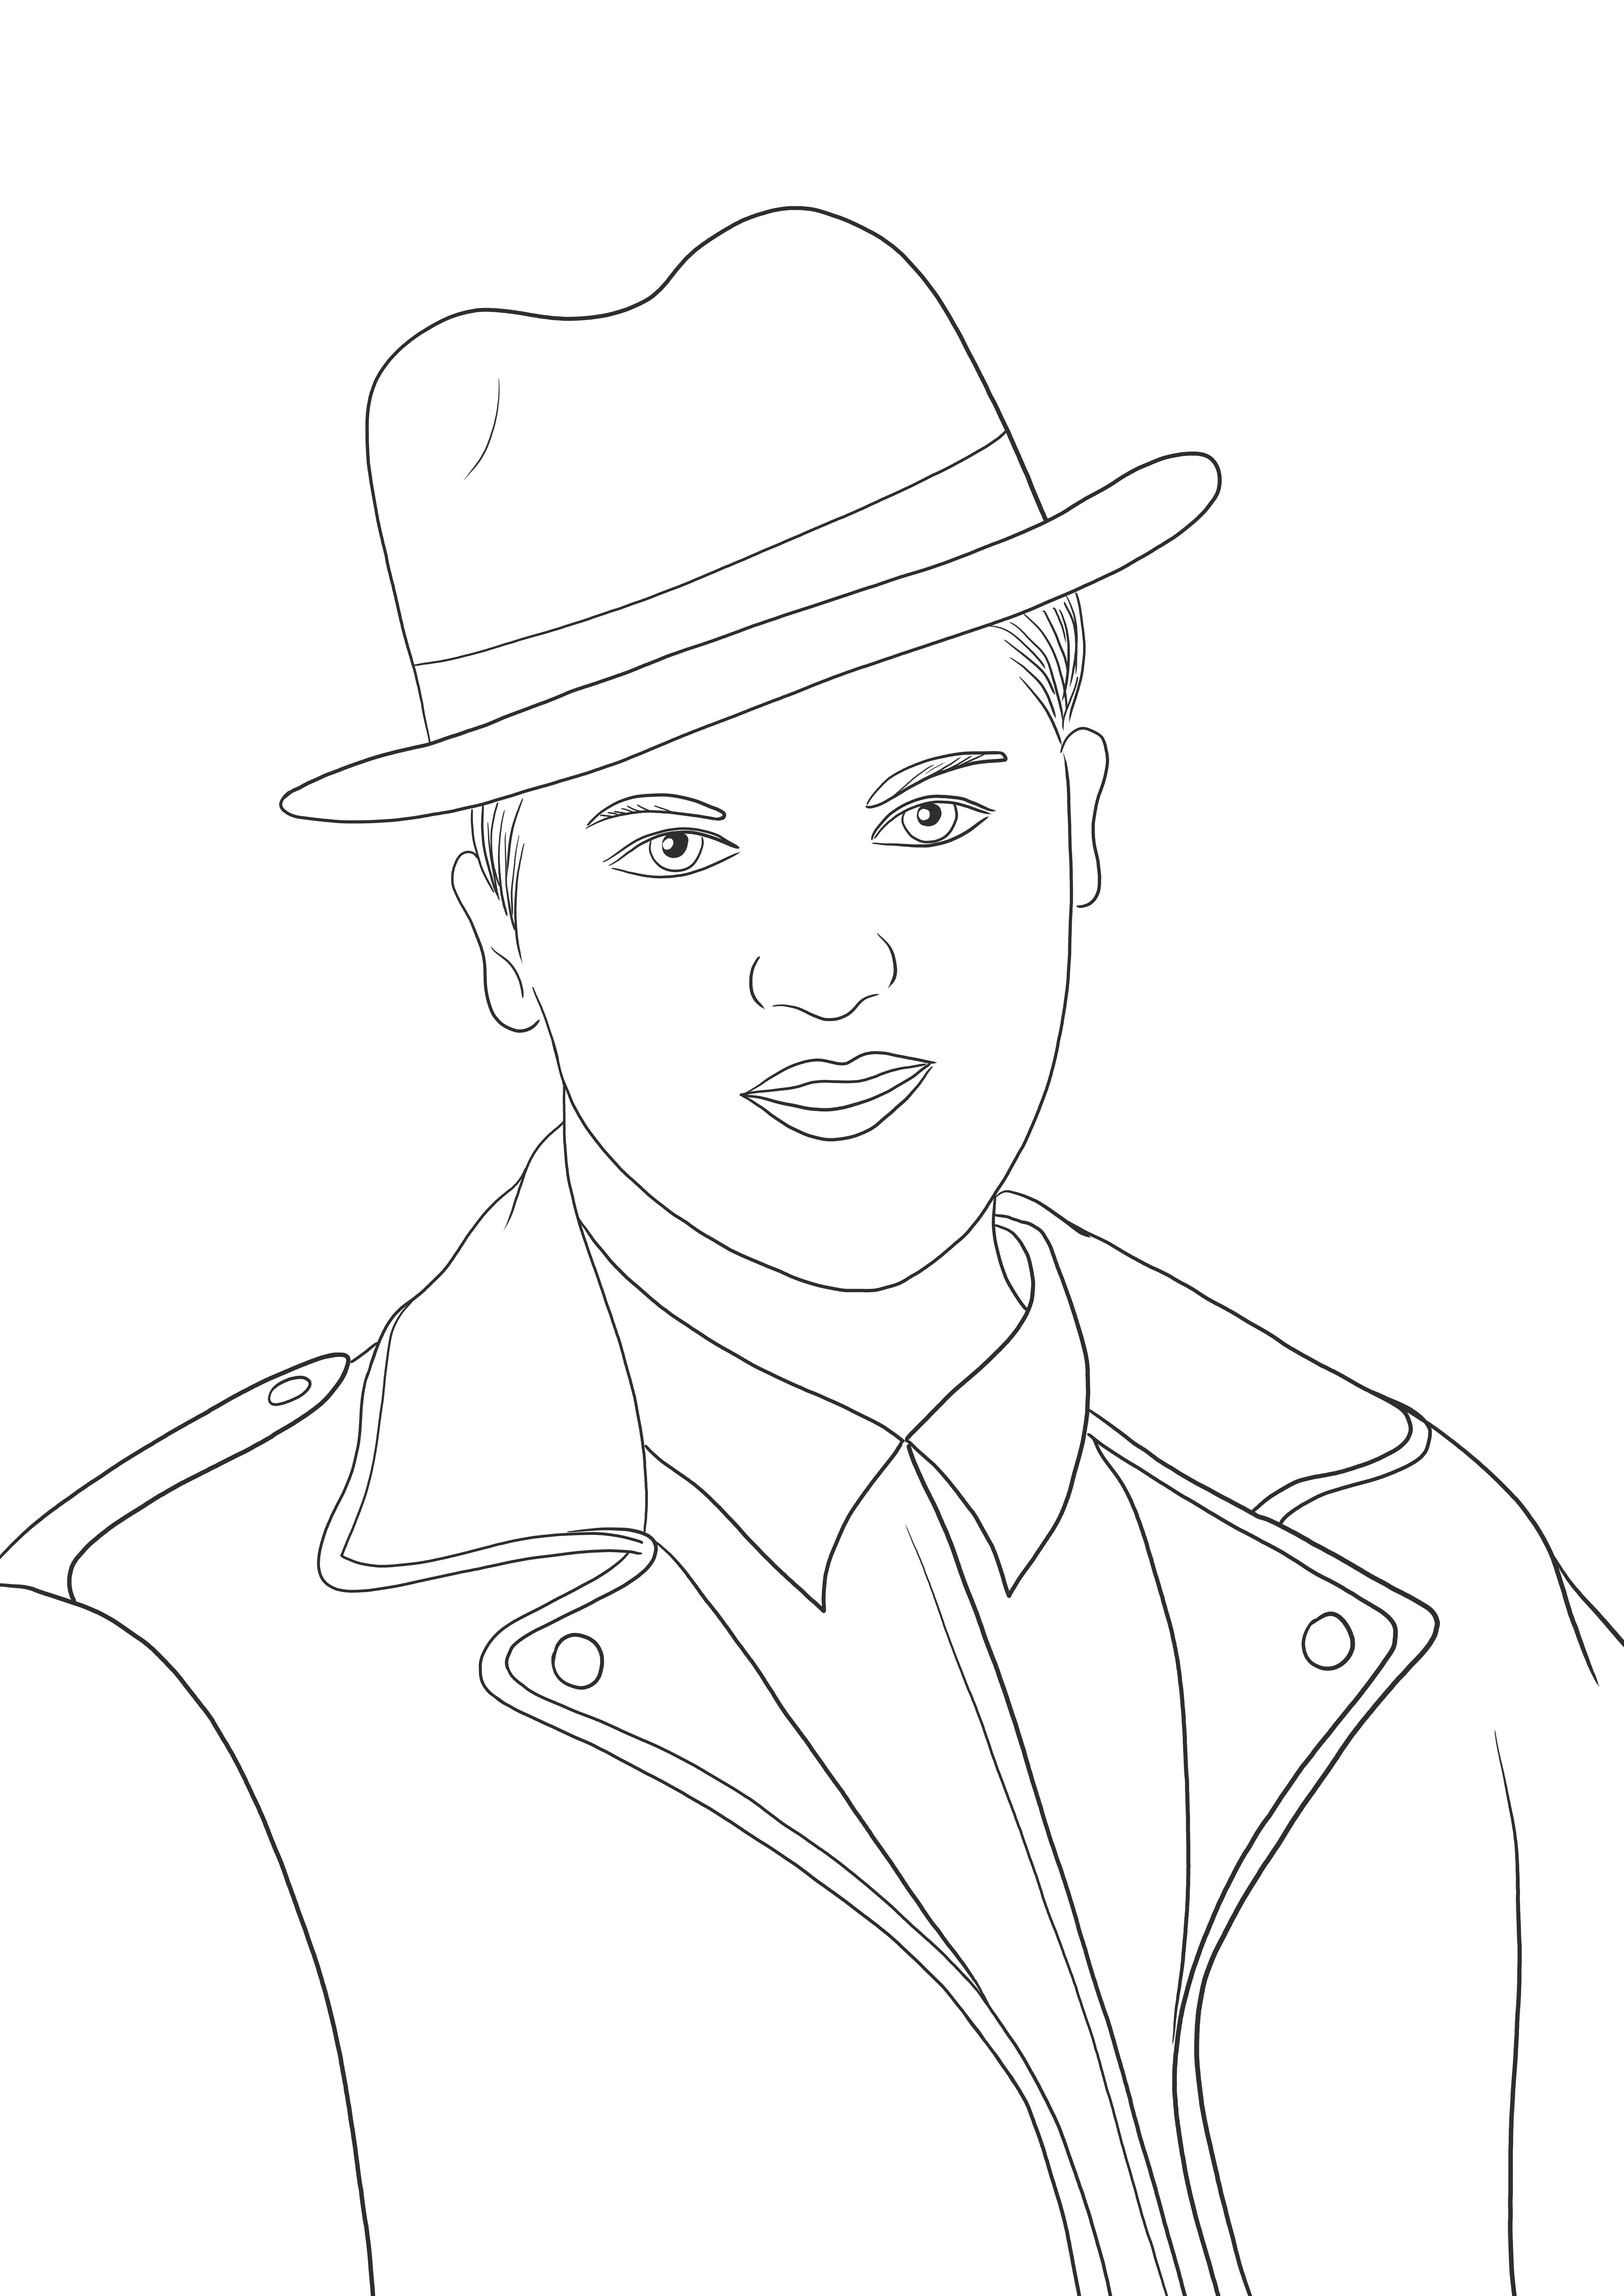 Bruno Mars - a famous person coloring sheet free to print